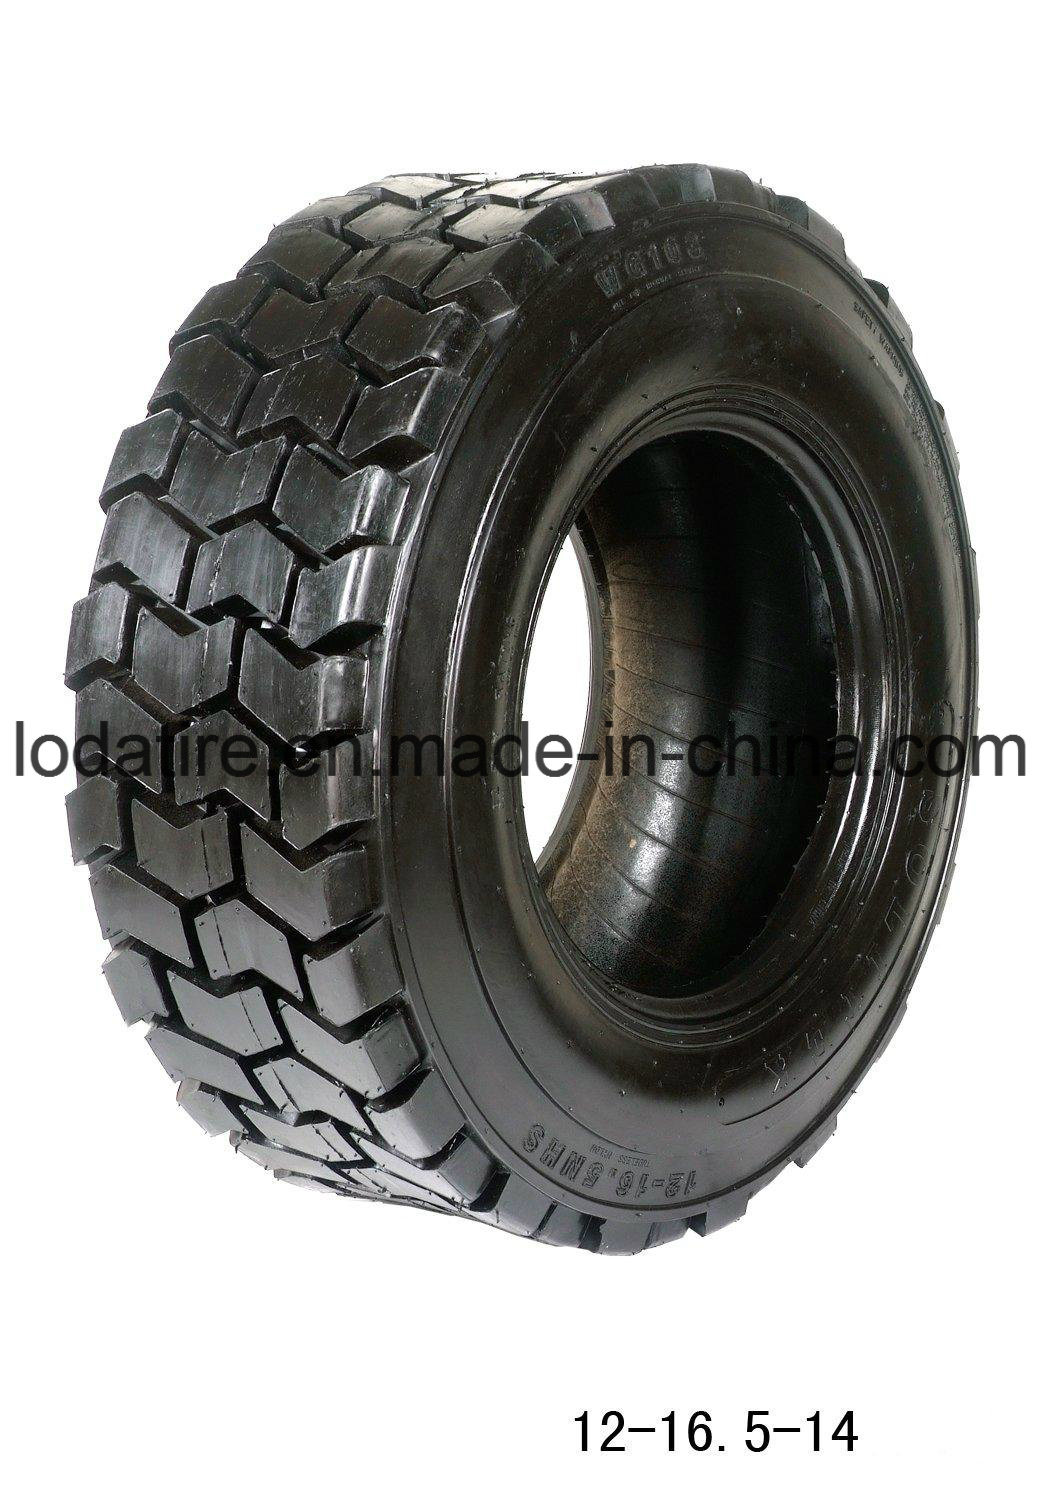 Wholesale Top Tire Factory in China 14-17.5 15-19.5 12-16.5 10-16.5 Skid-Steer Tyres